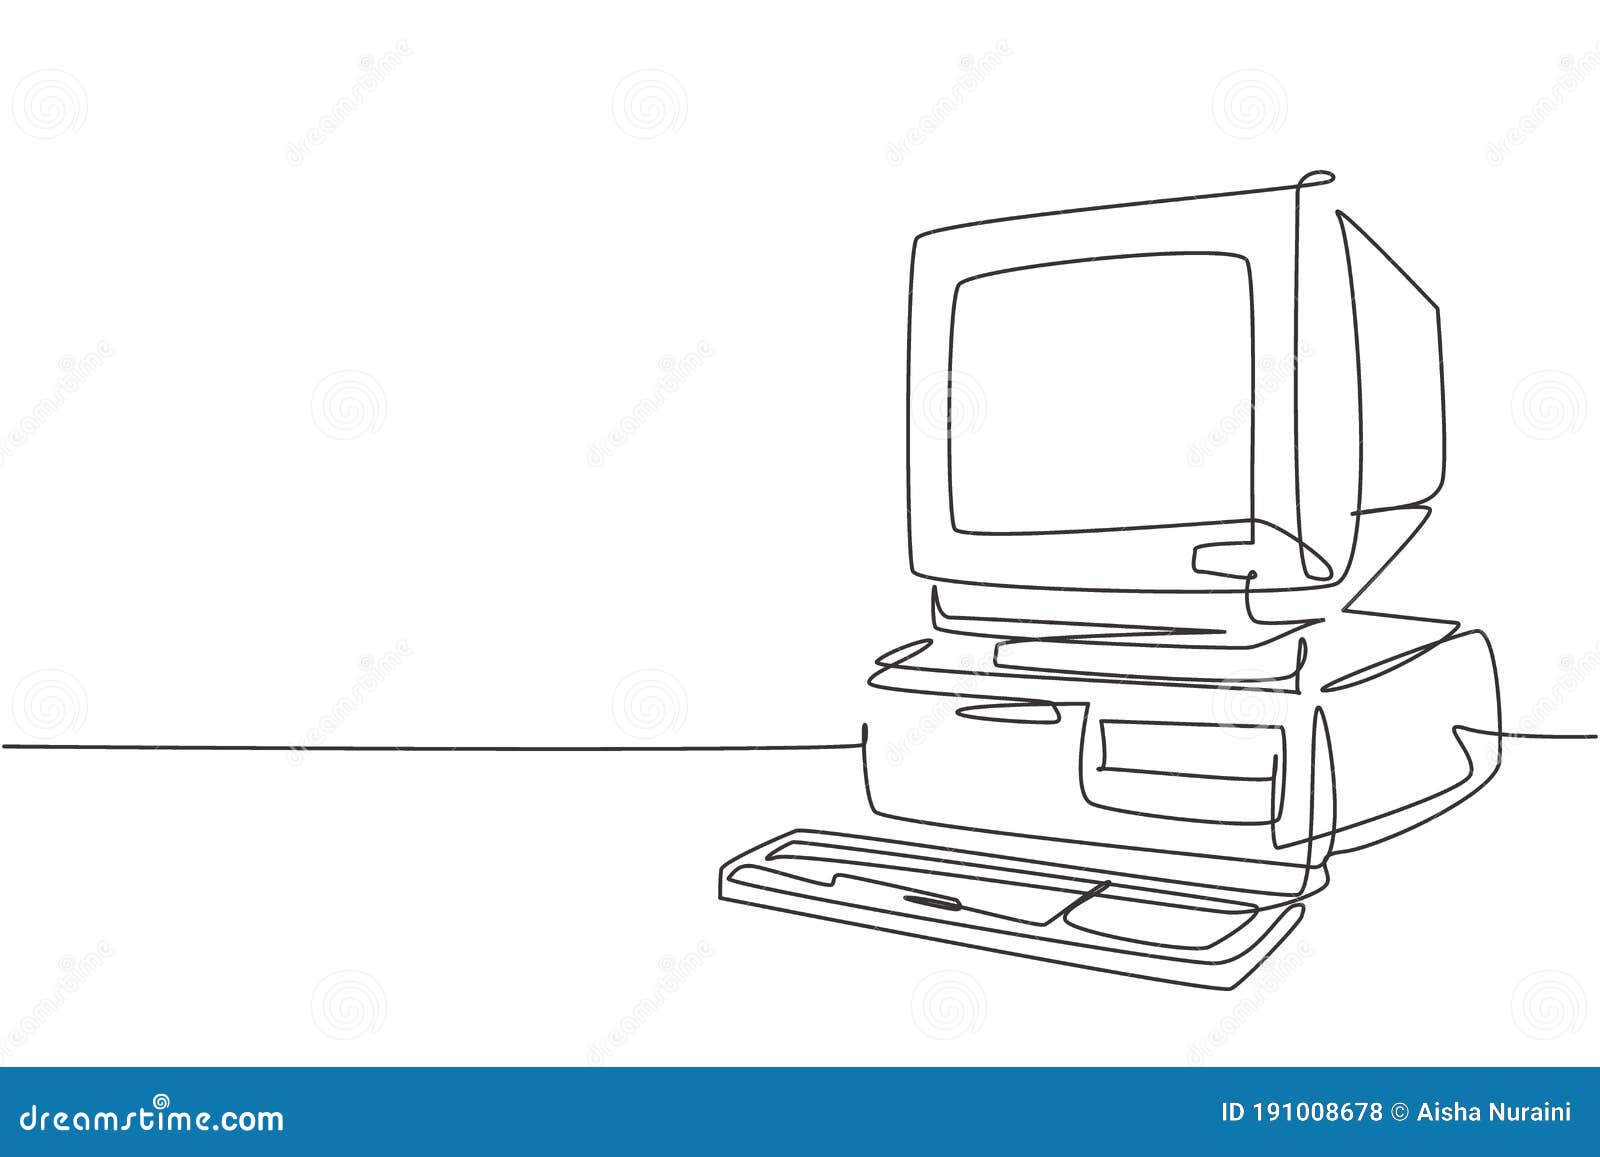 single continuous line drawing retro old classic personal computer processor unit vintage cpu analog monitor keyboard 191008678